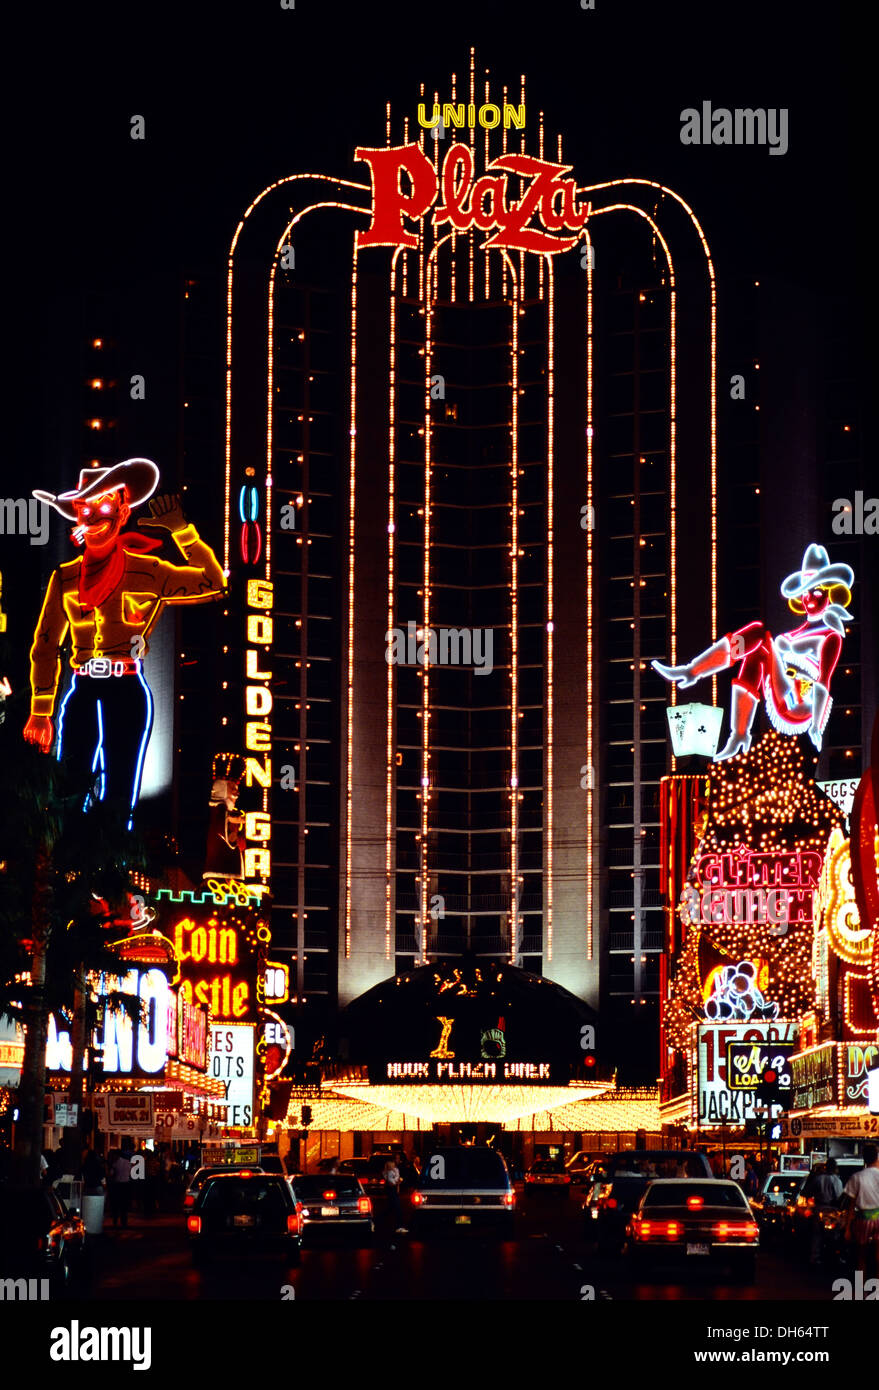 Landmark, famous cowboy figure 'Vegas Vic', Plaza Hotel and Casino, and 'Cowgirl Vicky', Fremont Street, historic photograph Stock Photo